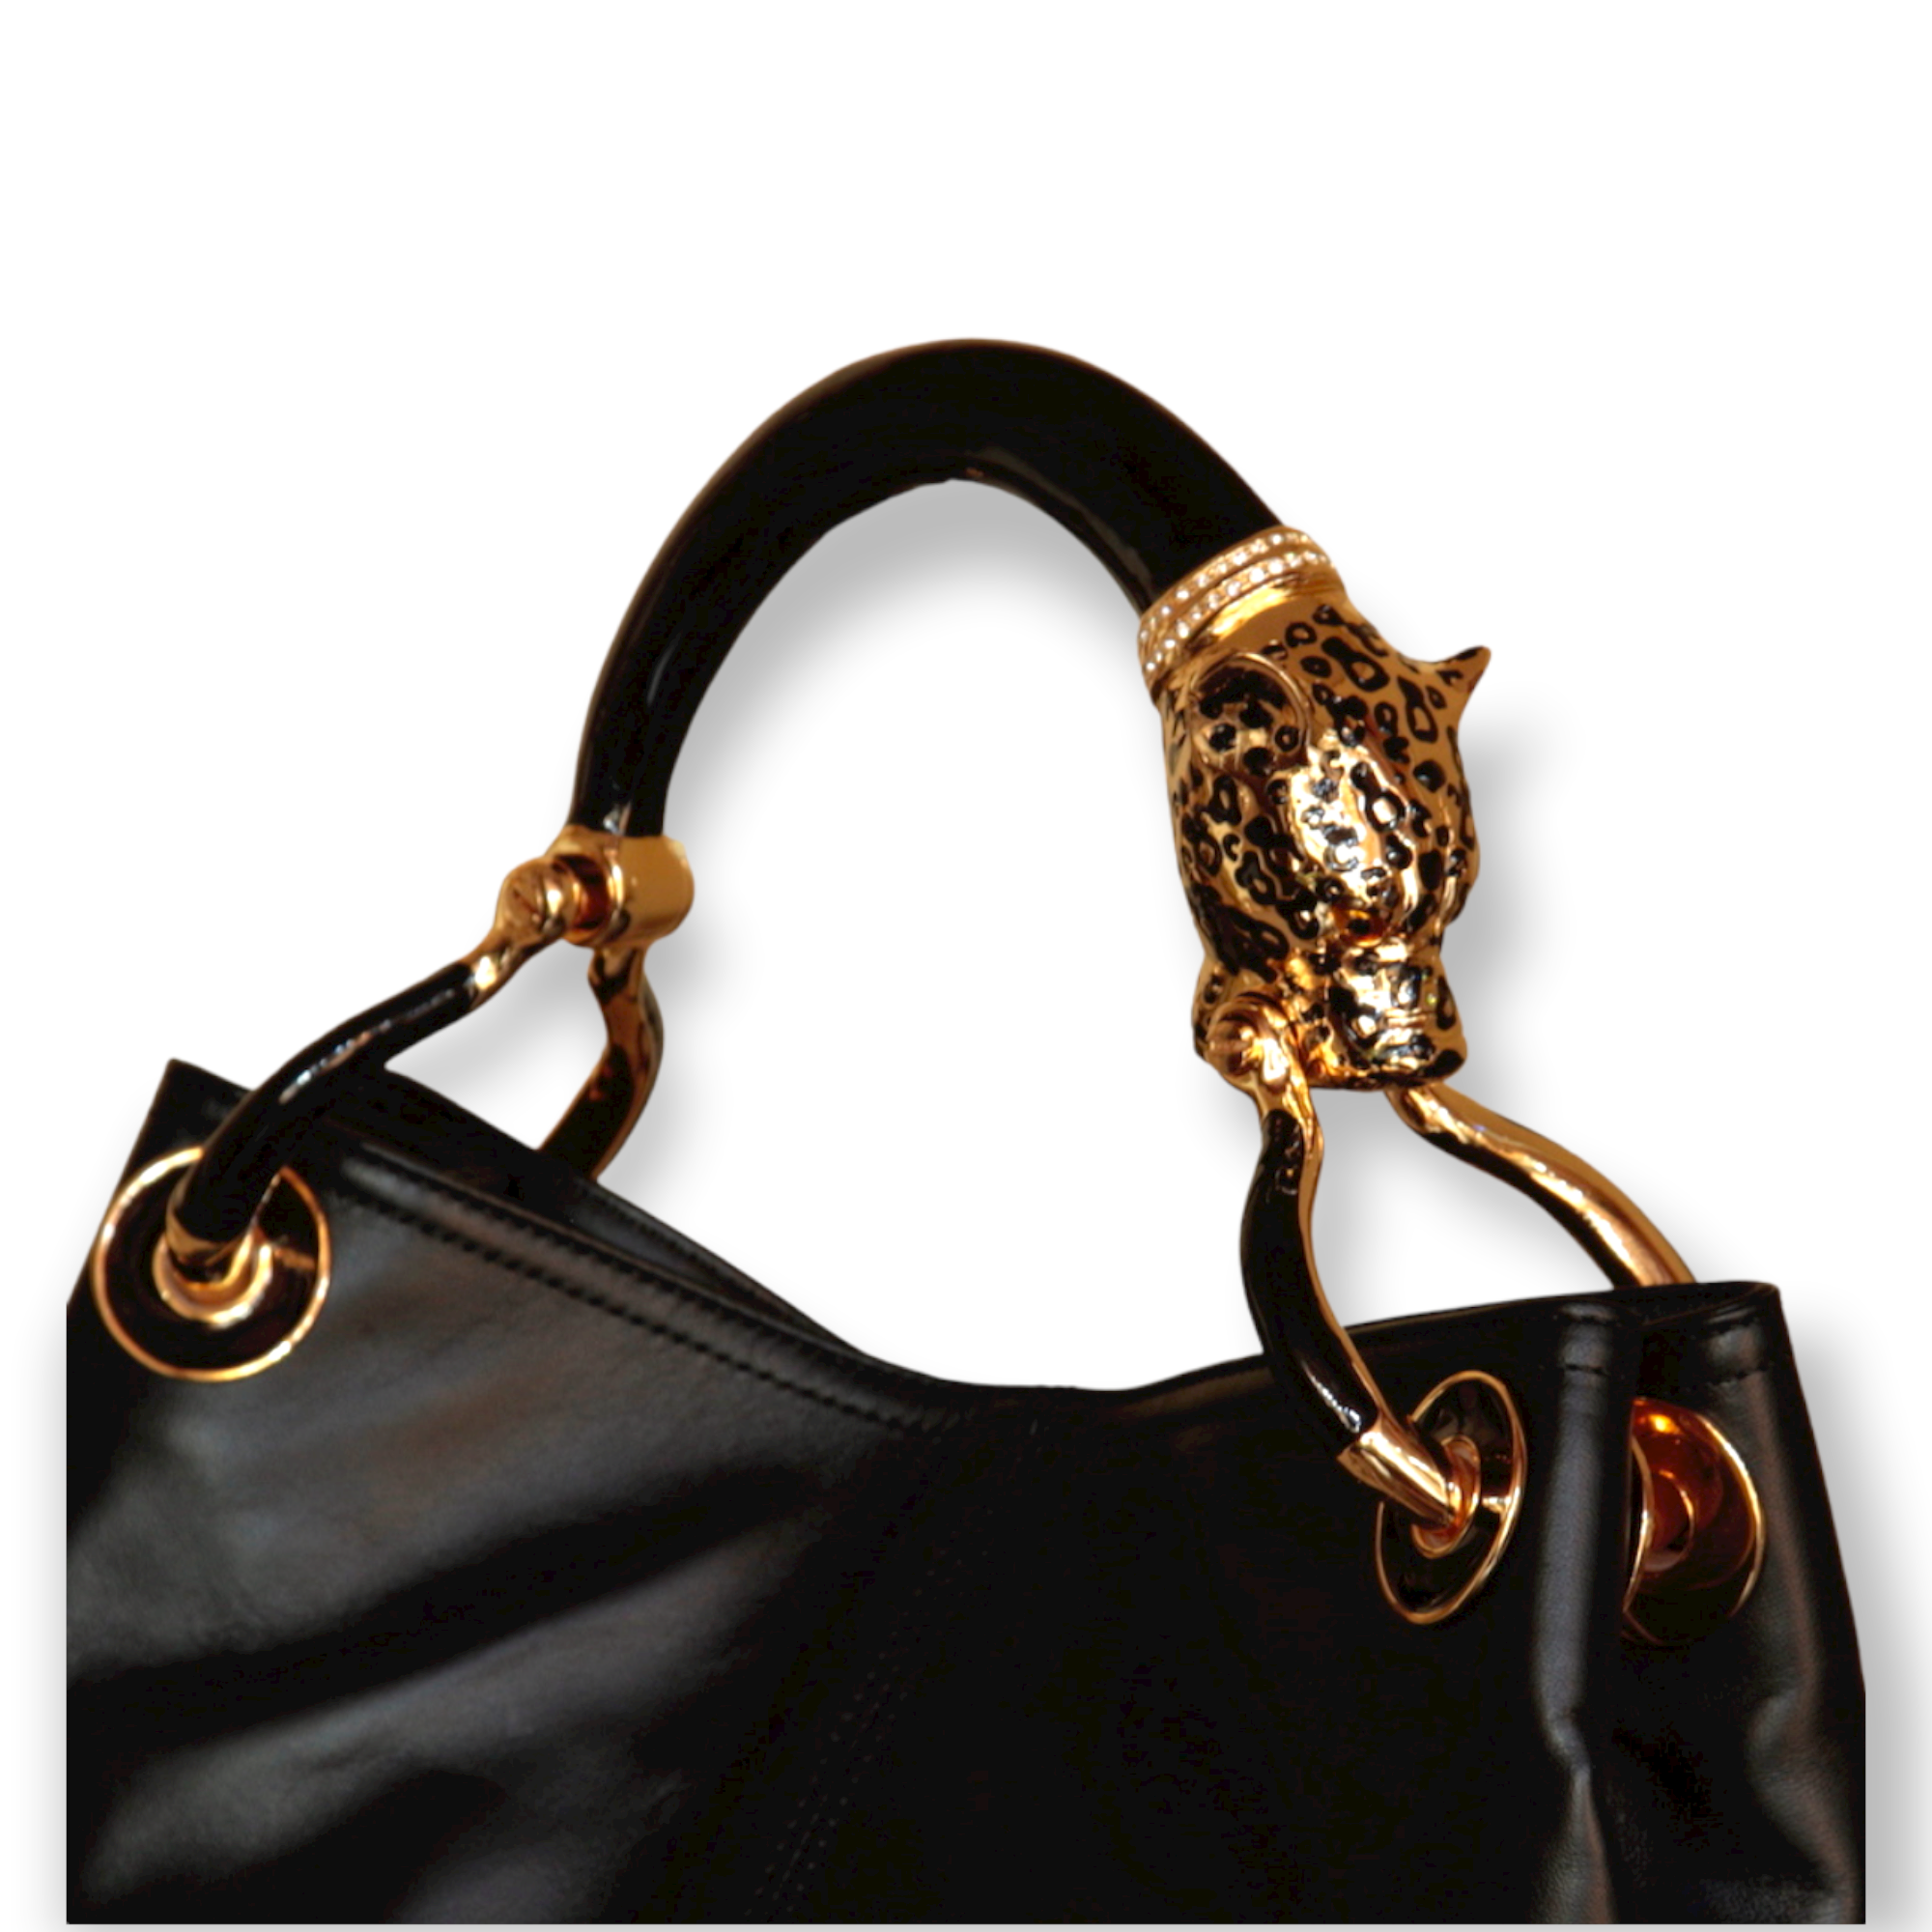 Precious handbag made in Italy in vegan leather with fine accessories made in polychrome enamels and exclusive